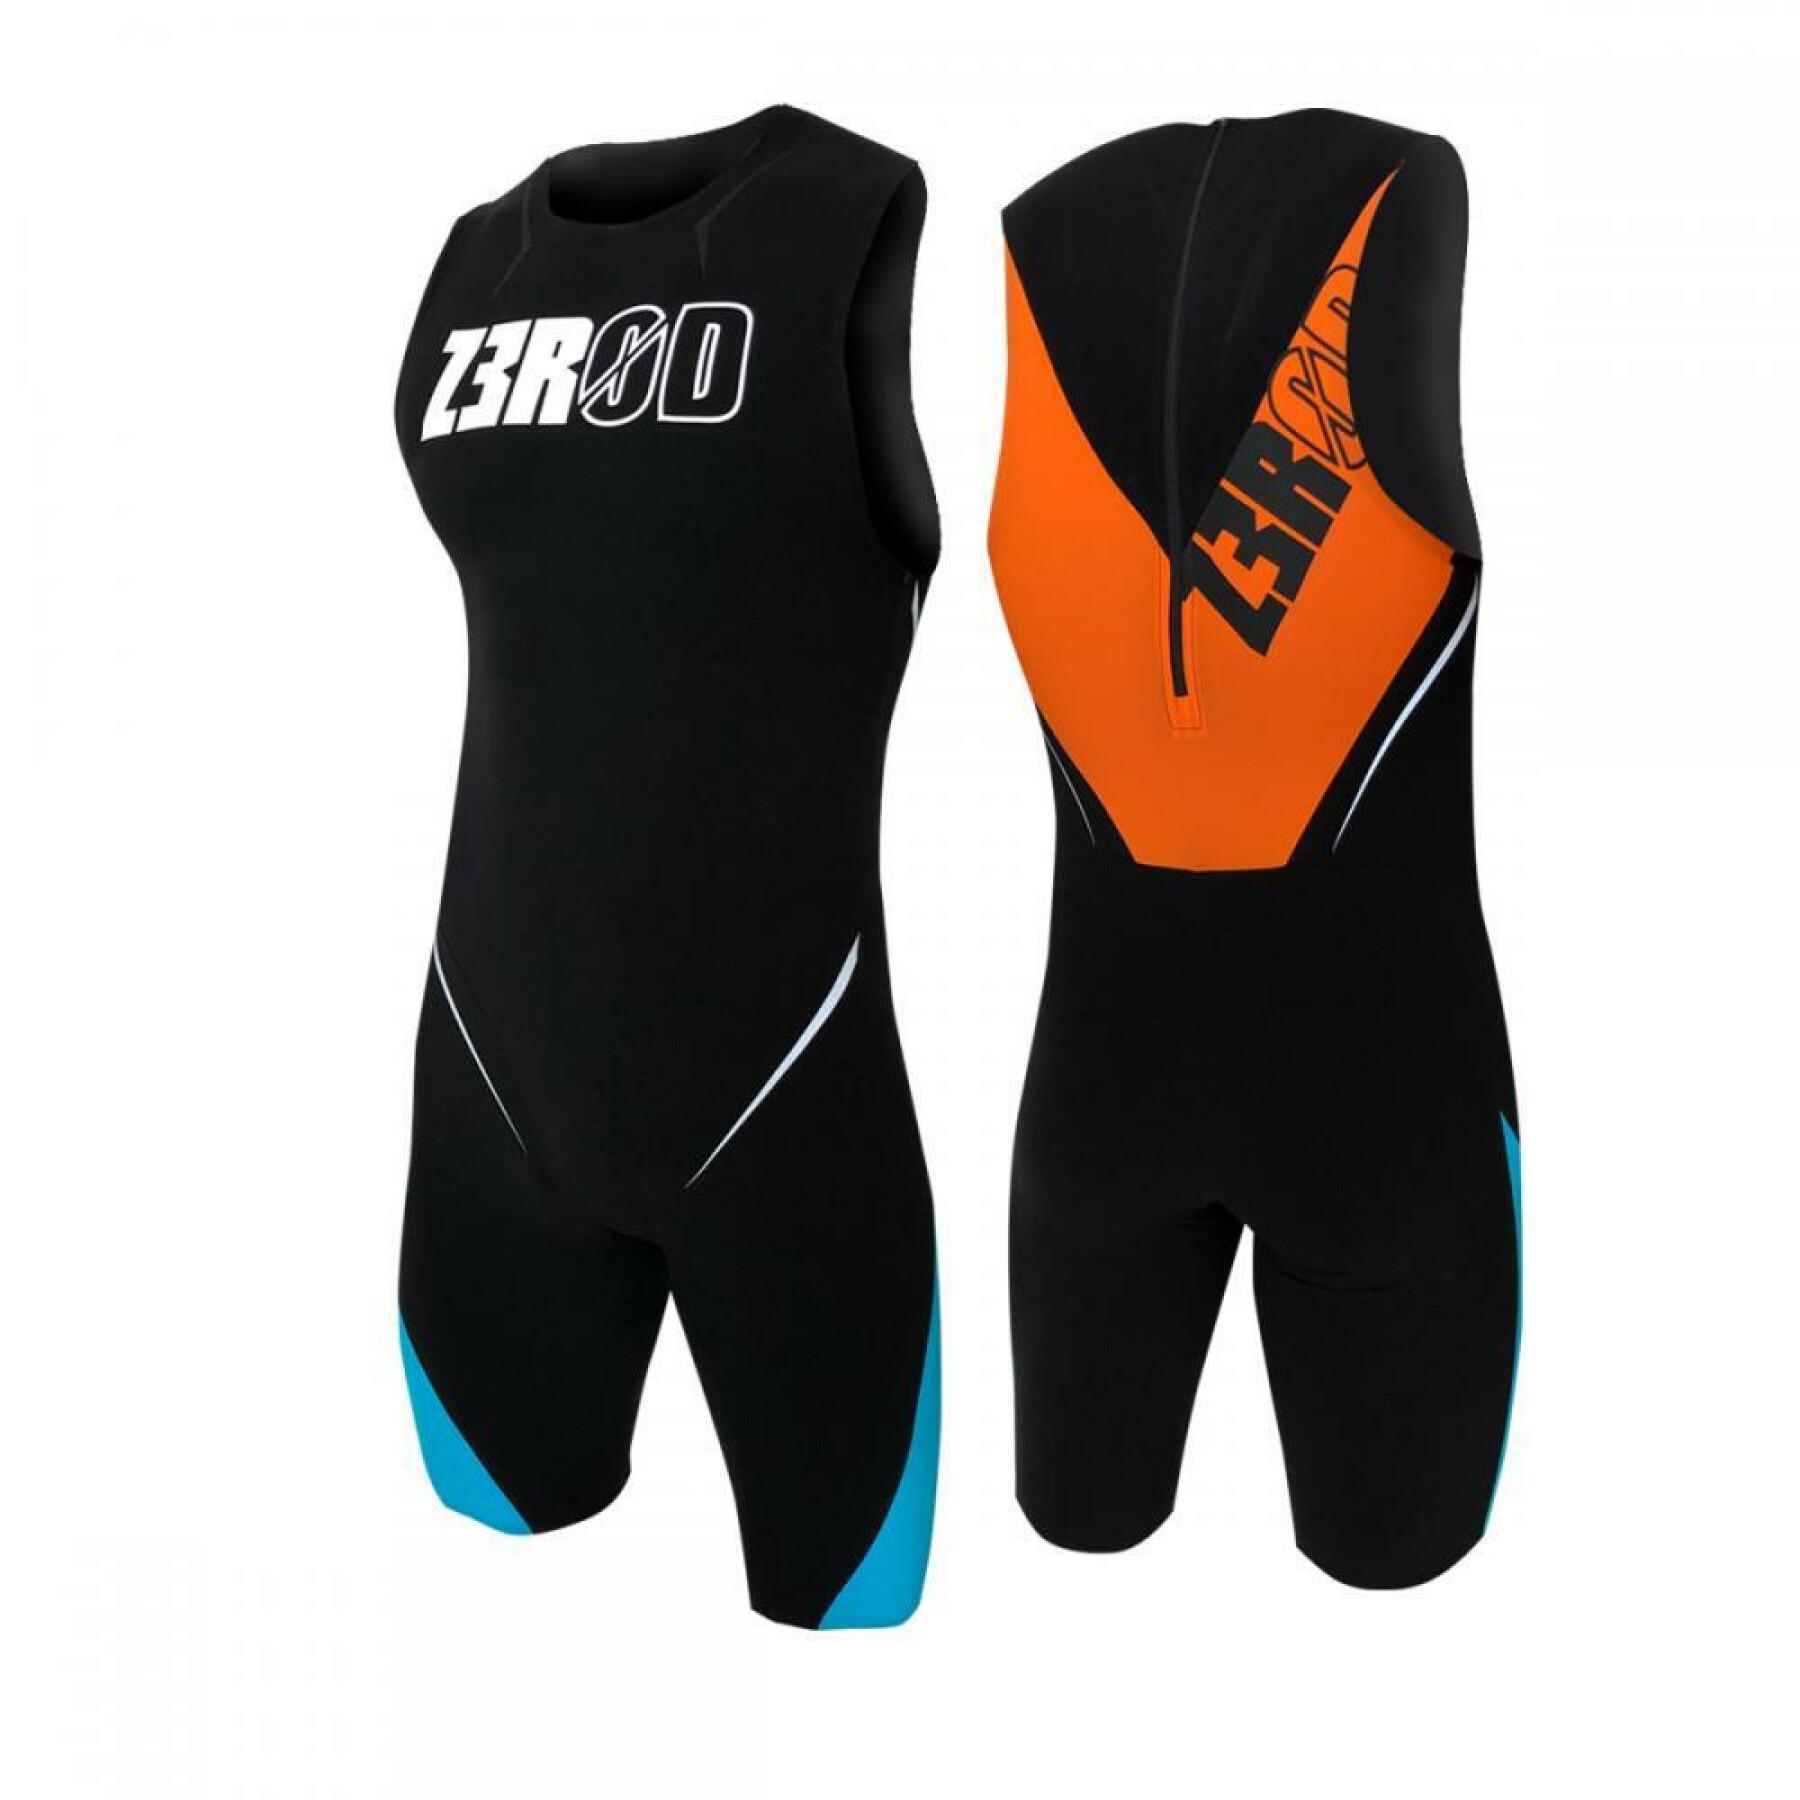 Tri-function without speed sleeves Z3R0D Elite